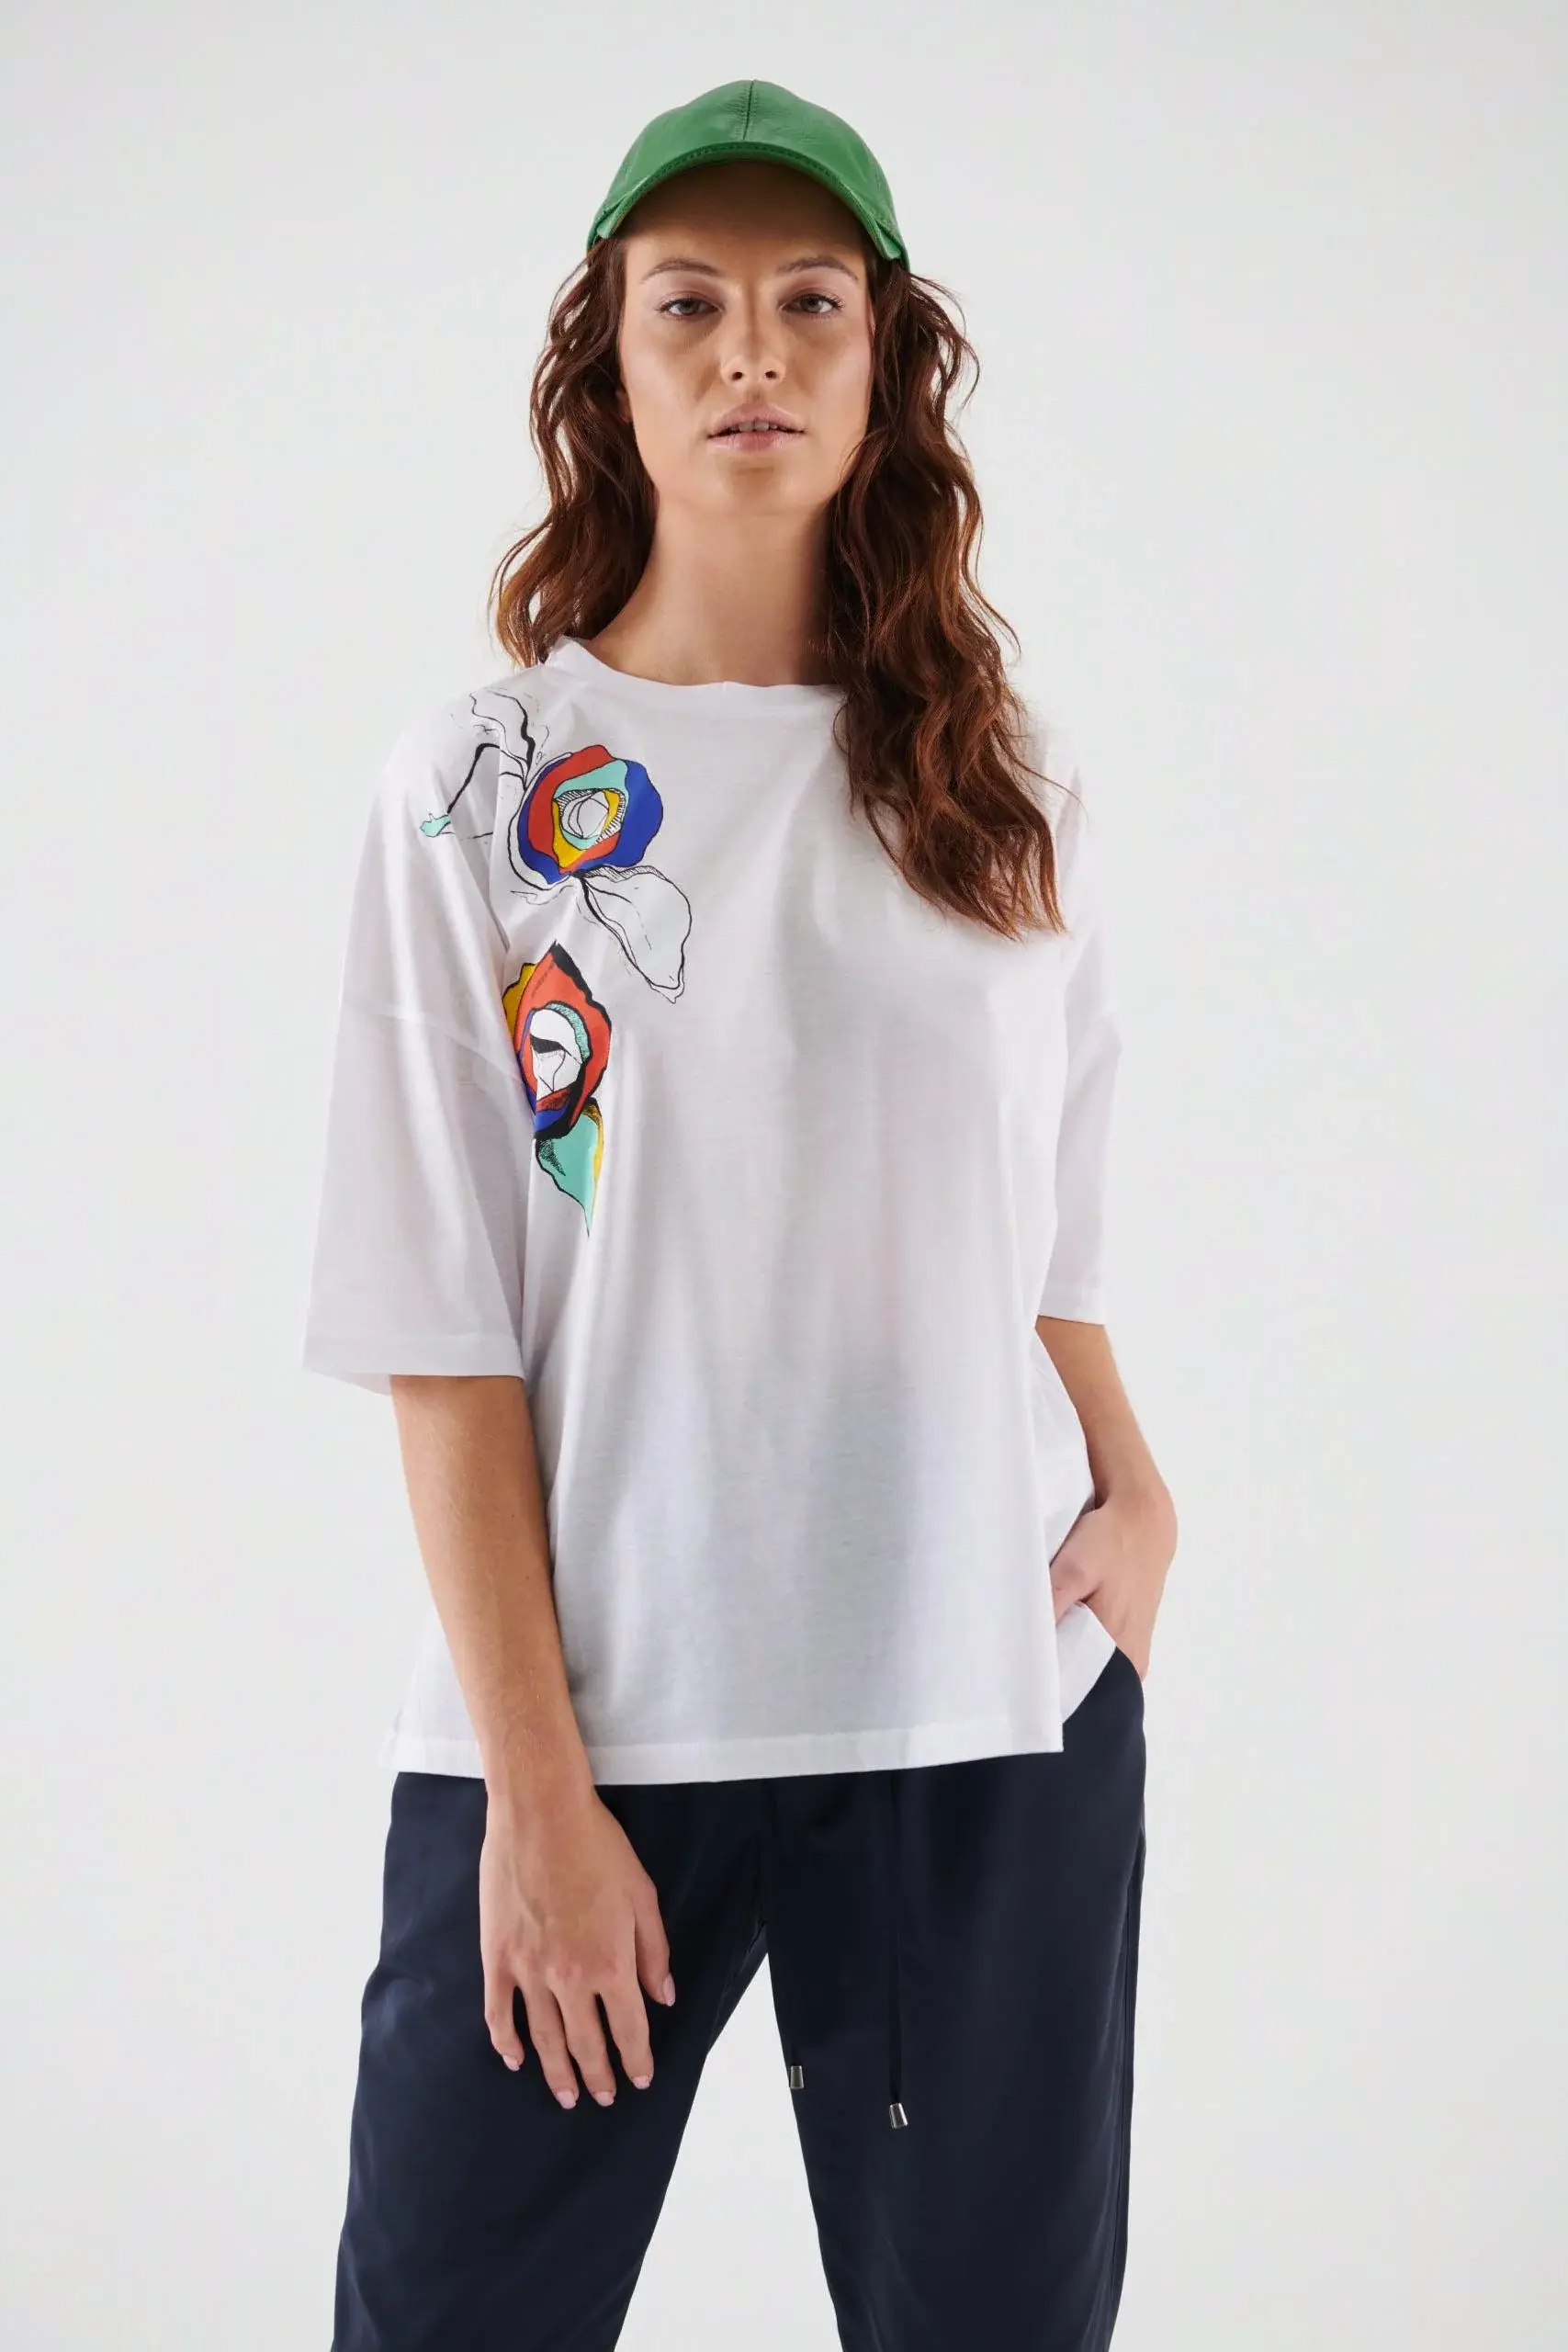 Roman Abstract Floral Women's T-shirt - 1 / White. 1